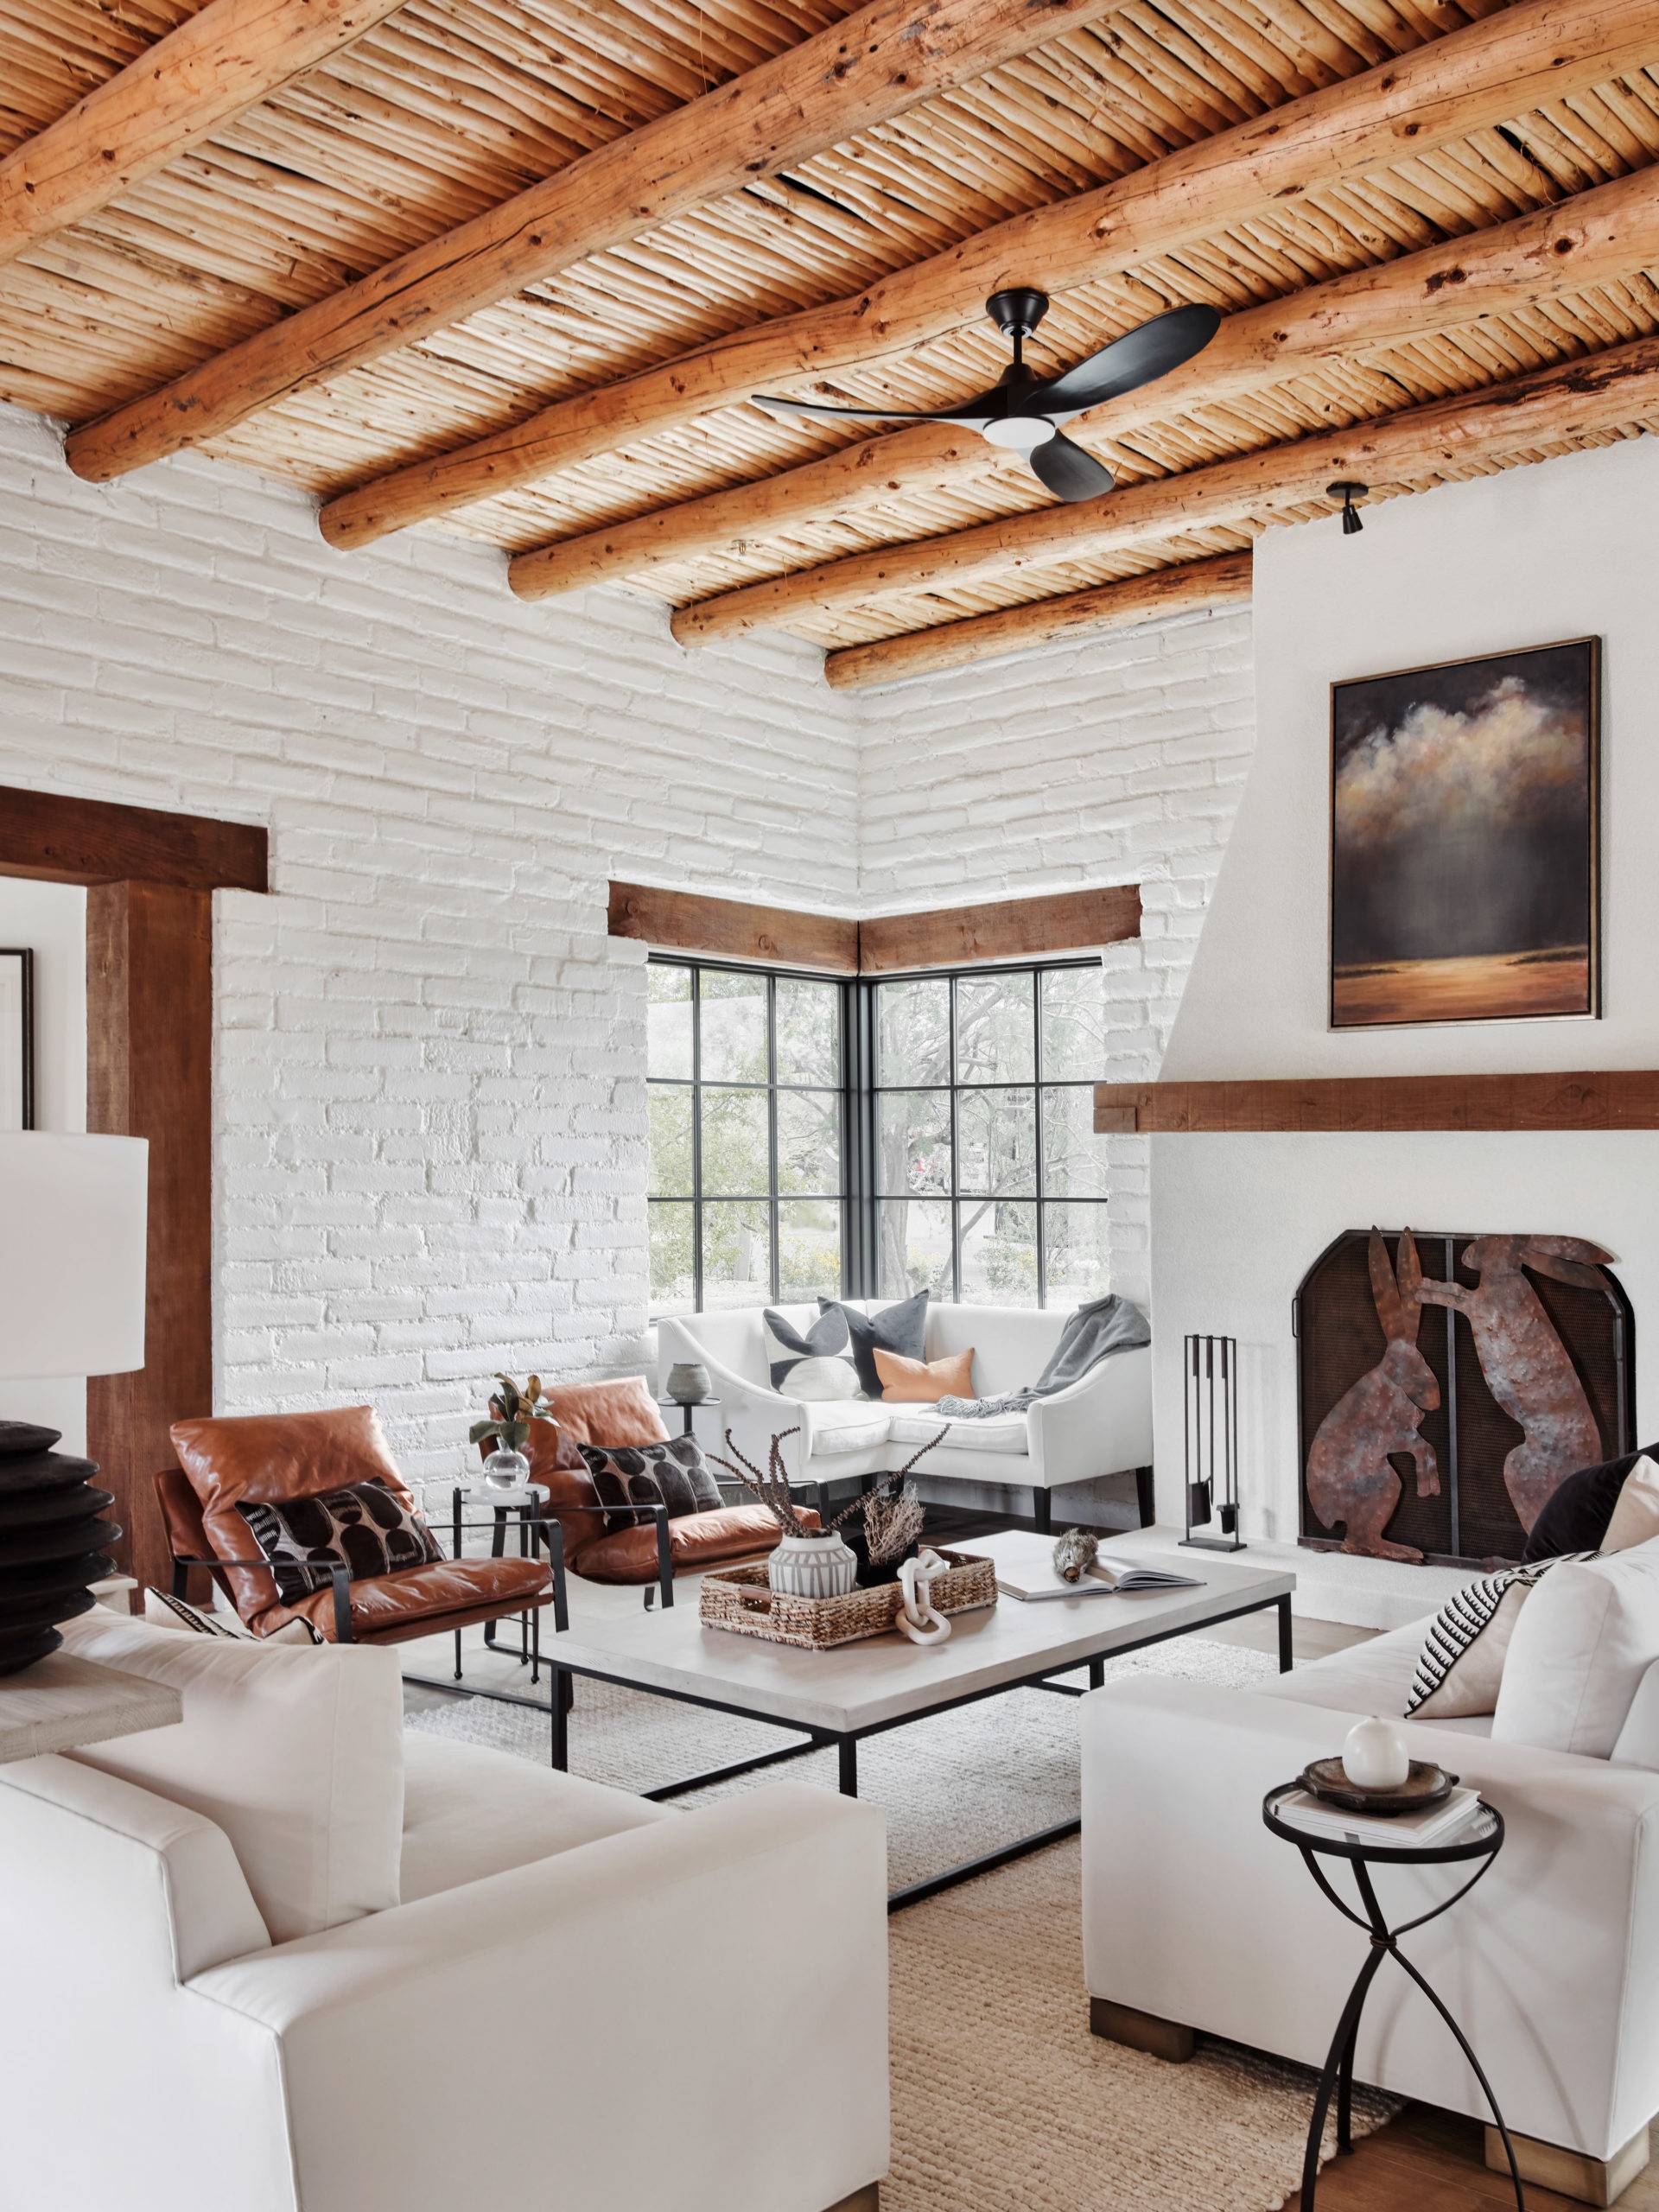 living room with wooden beams and white walls